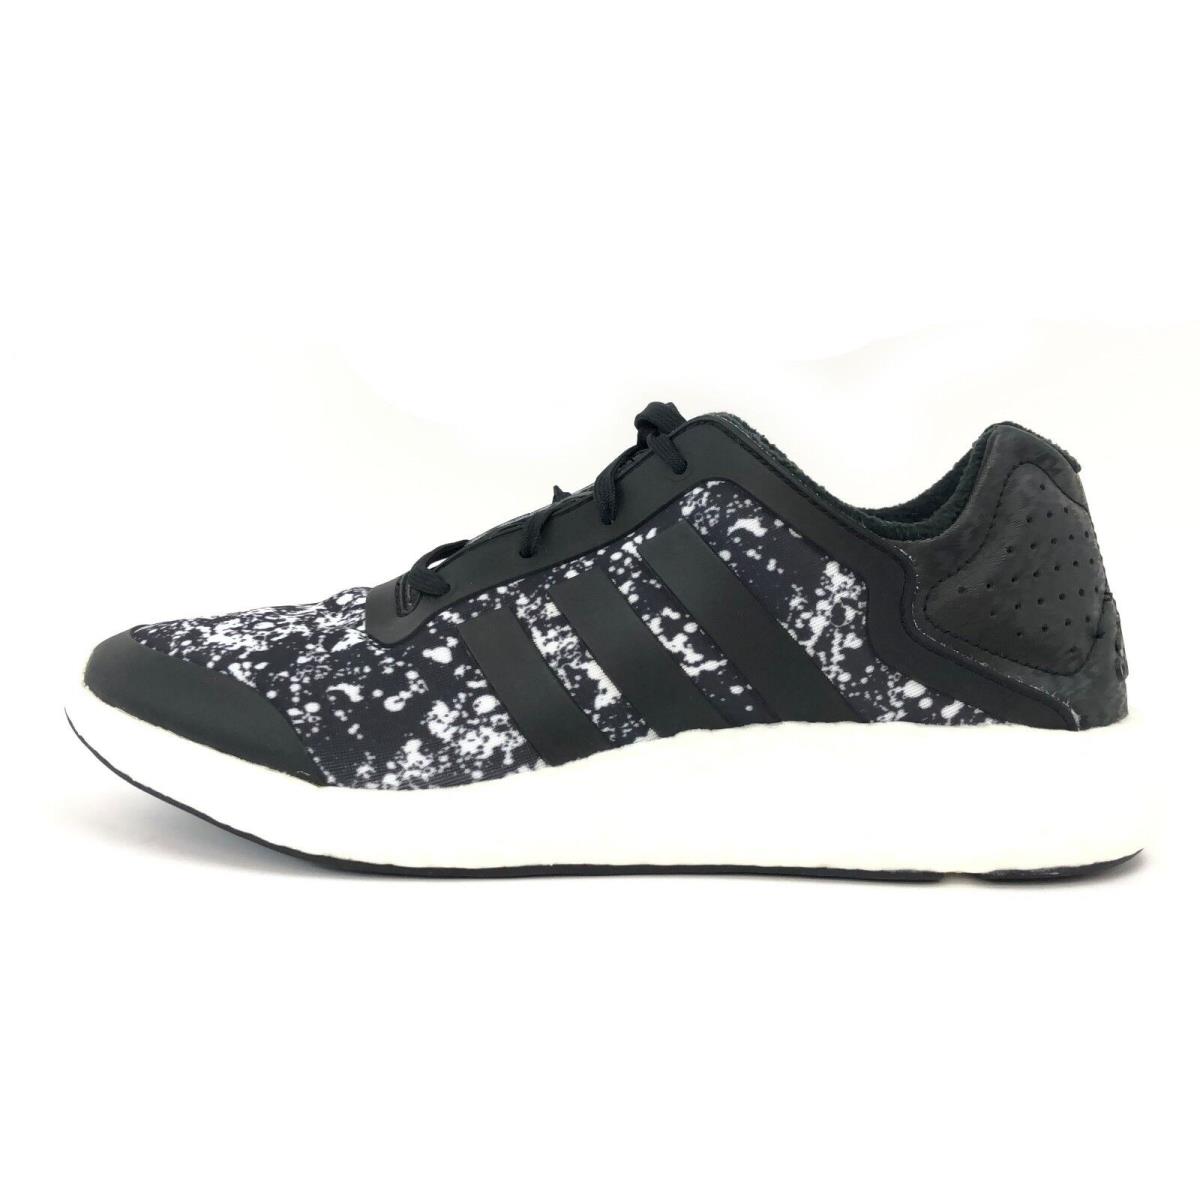 Adidas Women`s Pure Boost Core Black White Gym Running Shoes M21408